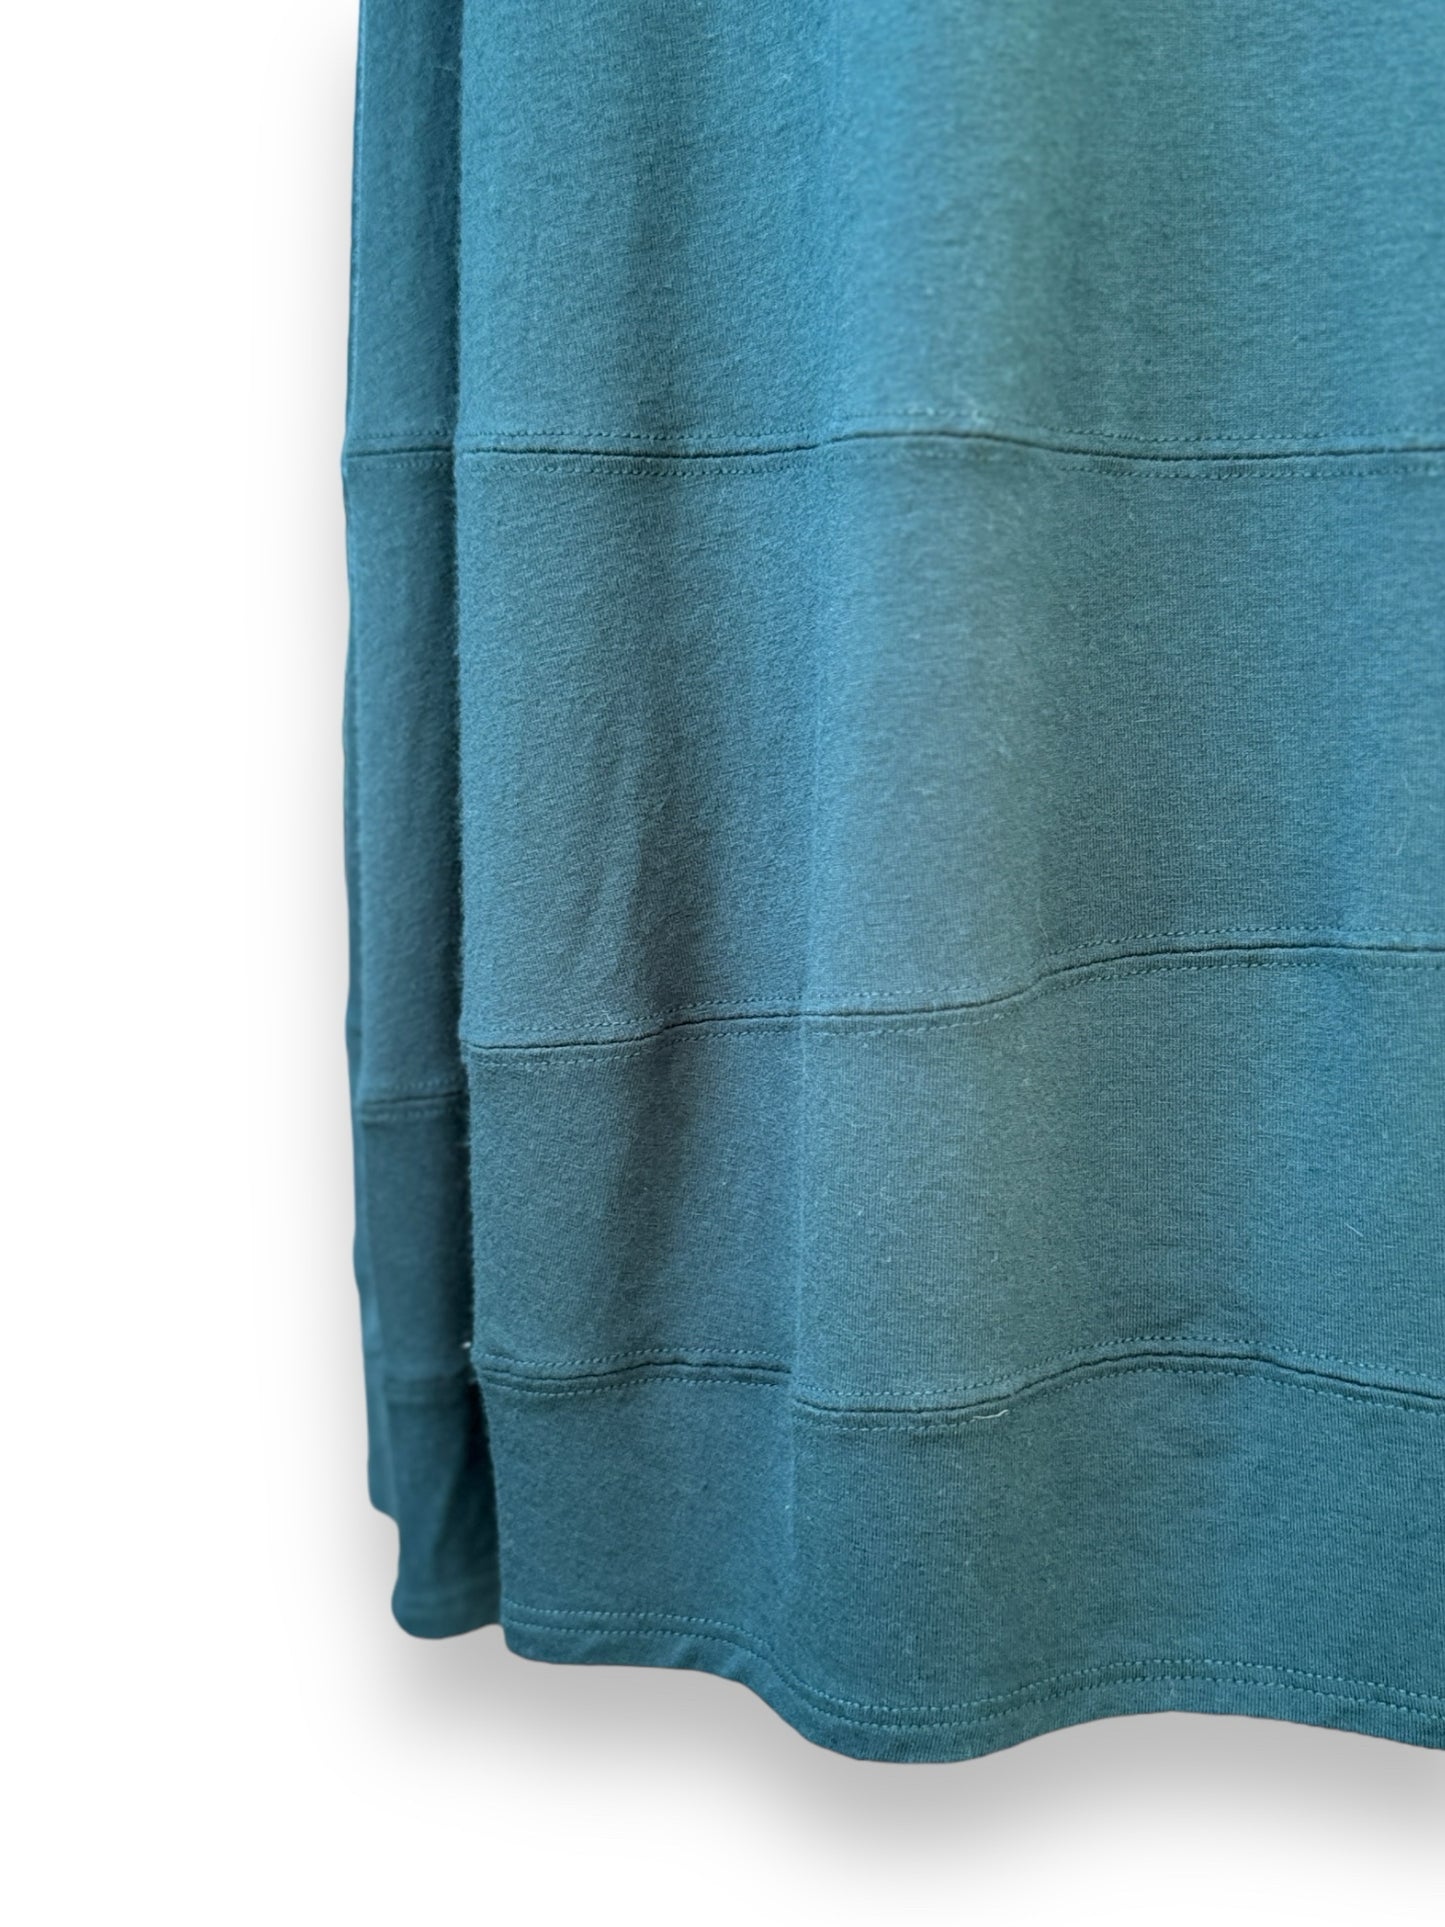 Size XS Eileen Fisher Teal Dress